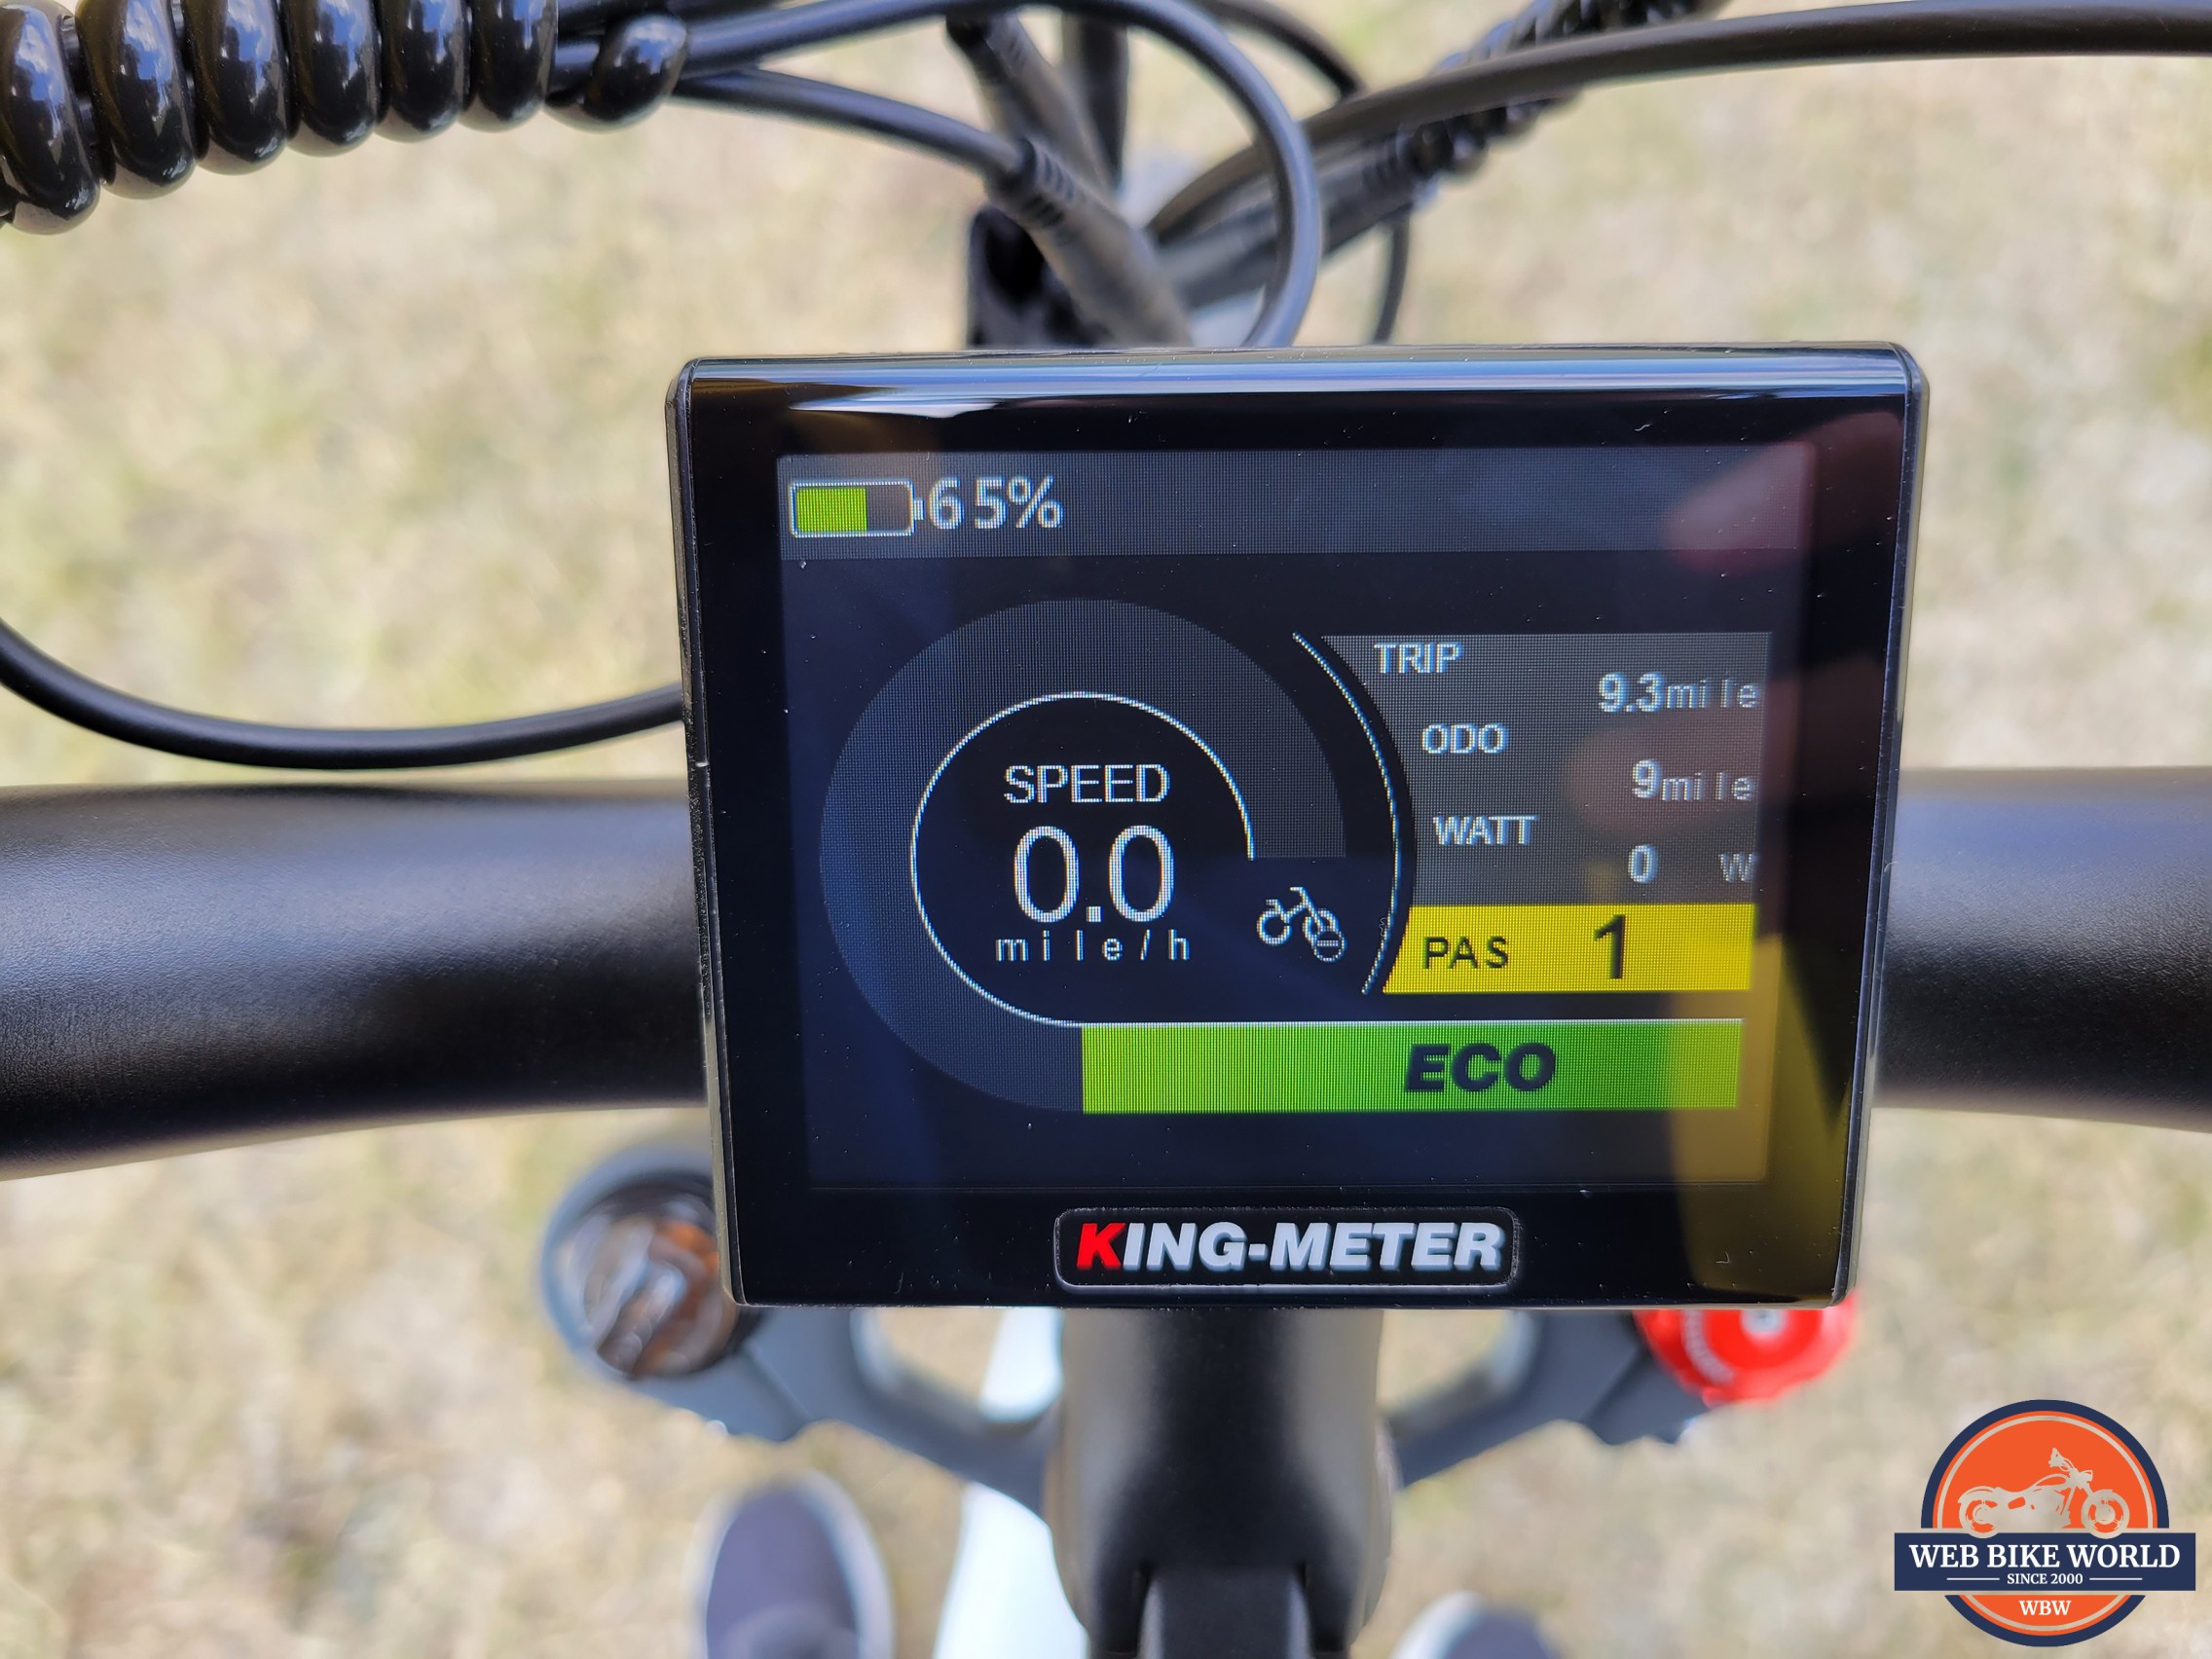 Photo of the LCD display from our initial 10 mile test ride.